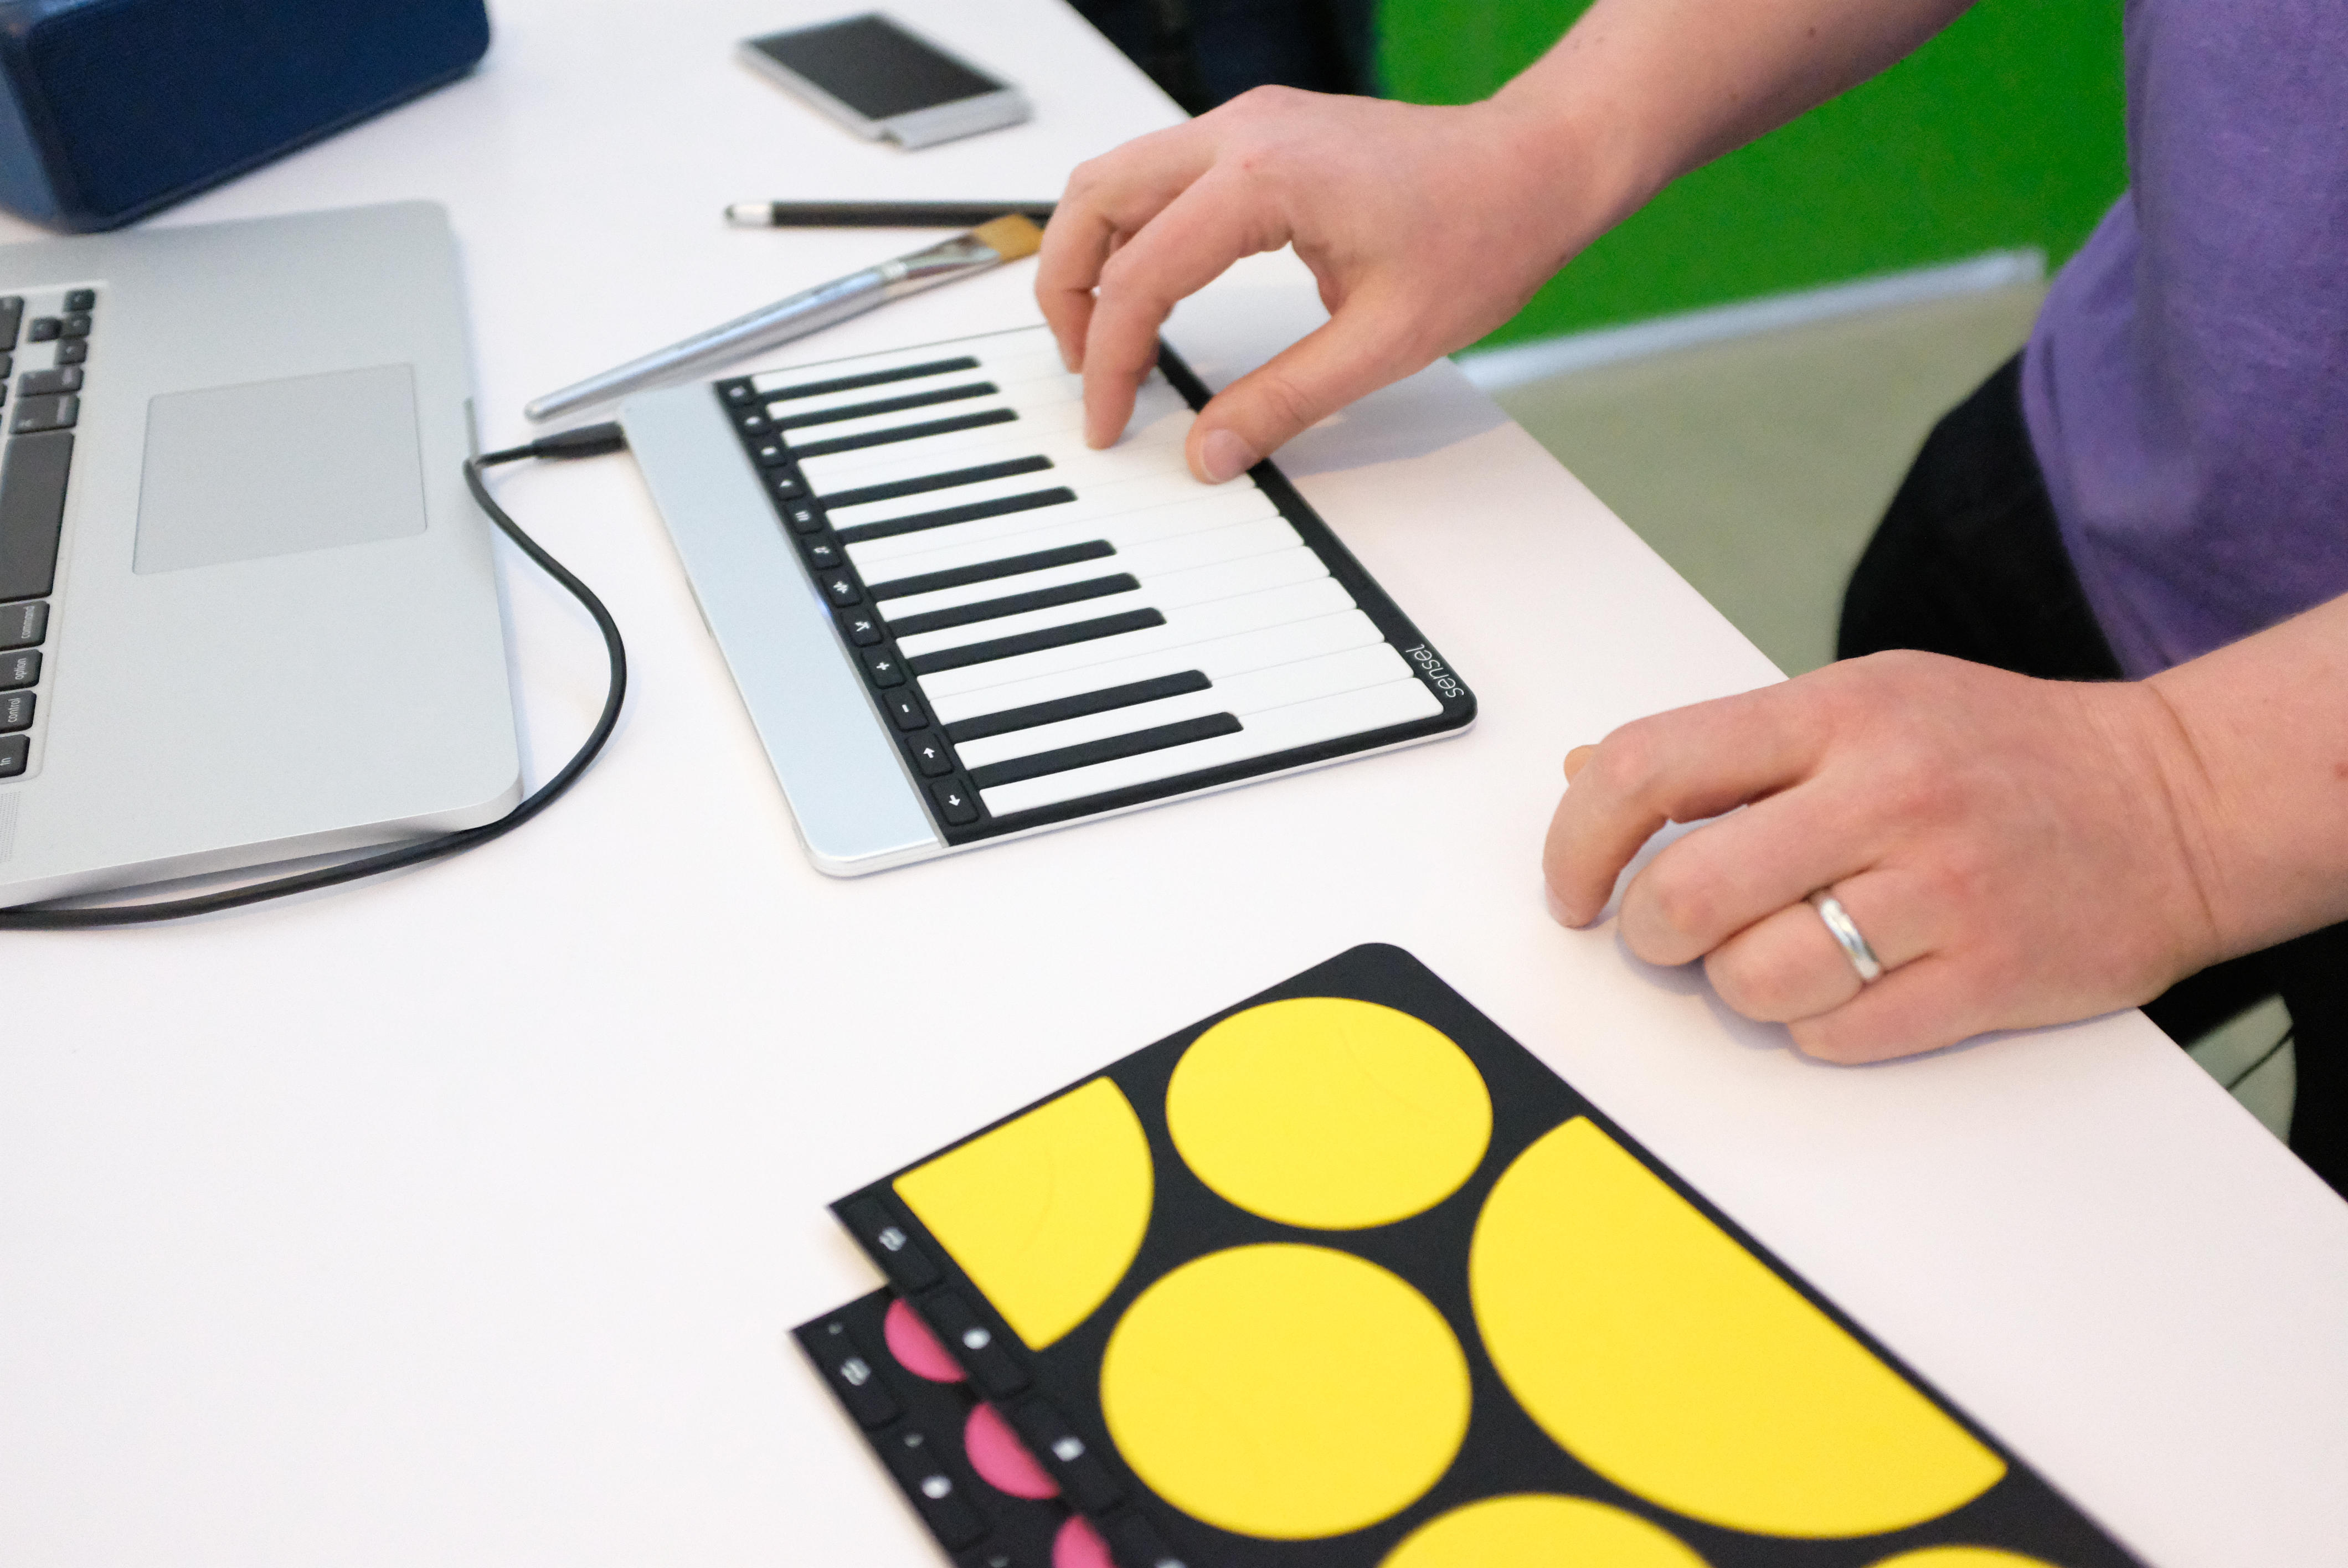 Sensel is shopping around its Morph trackpad tech for use in other devices